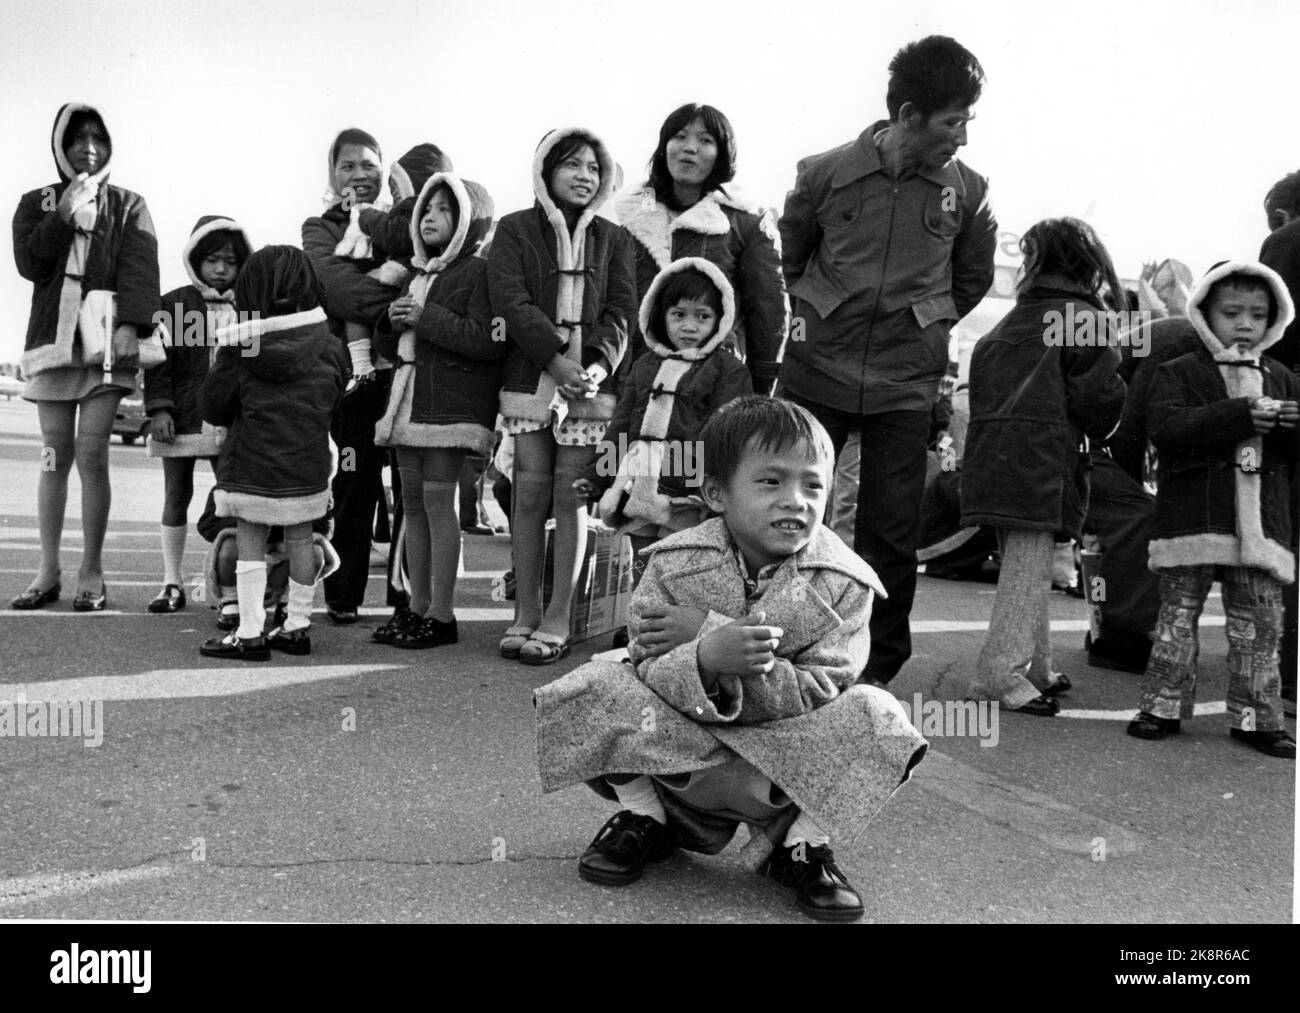 Oslo 19780413. Vietnamese refugees to Norway. A large group of Vietnamese refugees came to Norway and Fornebu by plane after a long journey. Some travel to Bergen, but most stay in Oslo. Here is a little boy in front of many girls, all dressed in the same duffel coats. Photo: NTB archive/ NTB Stock Photo